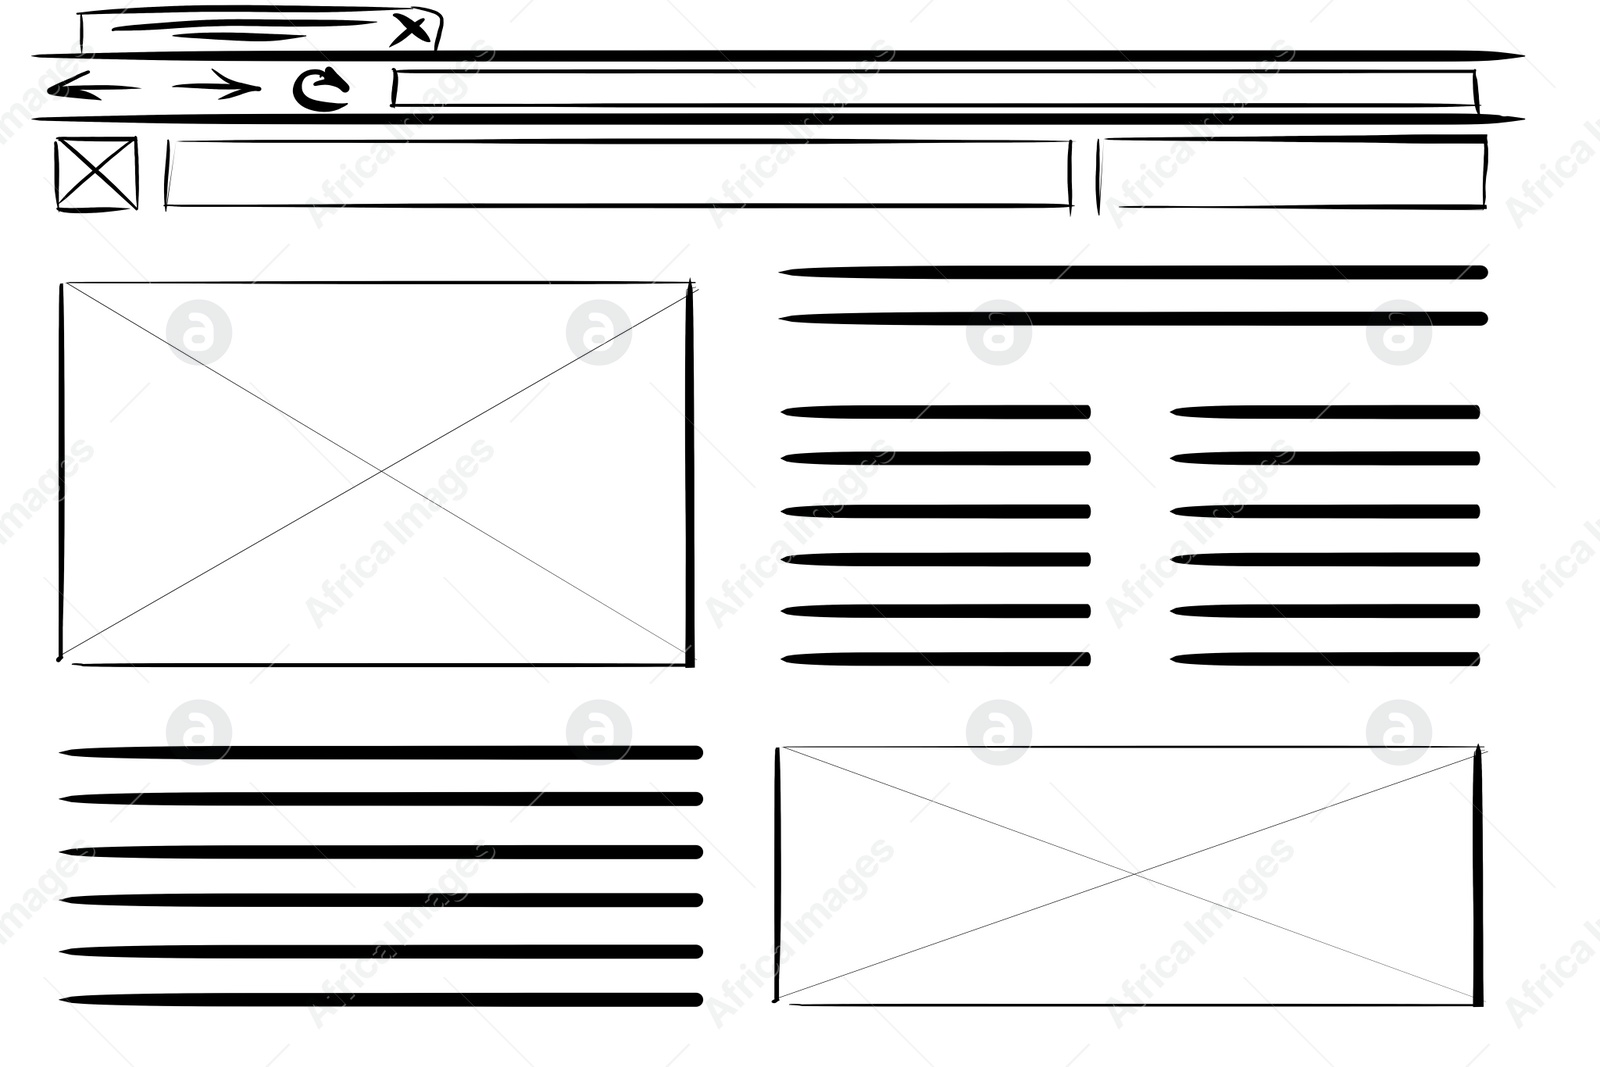 Image of Website design template, interface development. Wireframe with different elements on white background